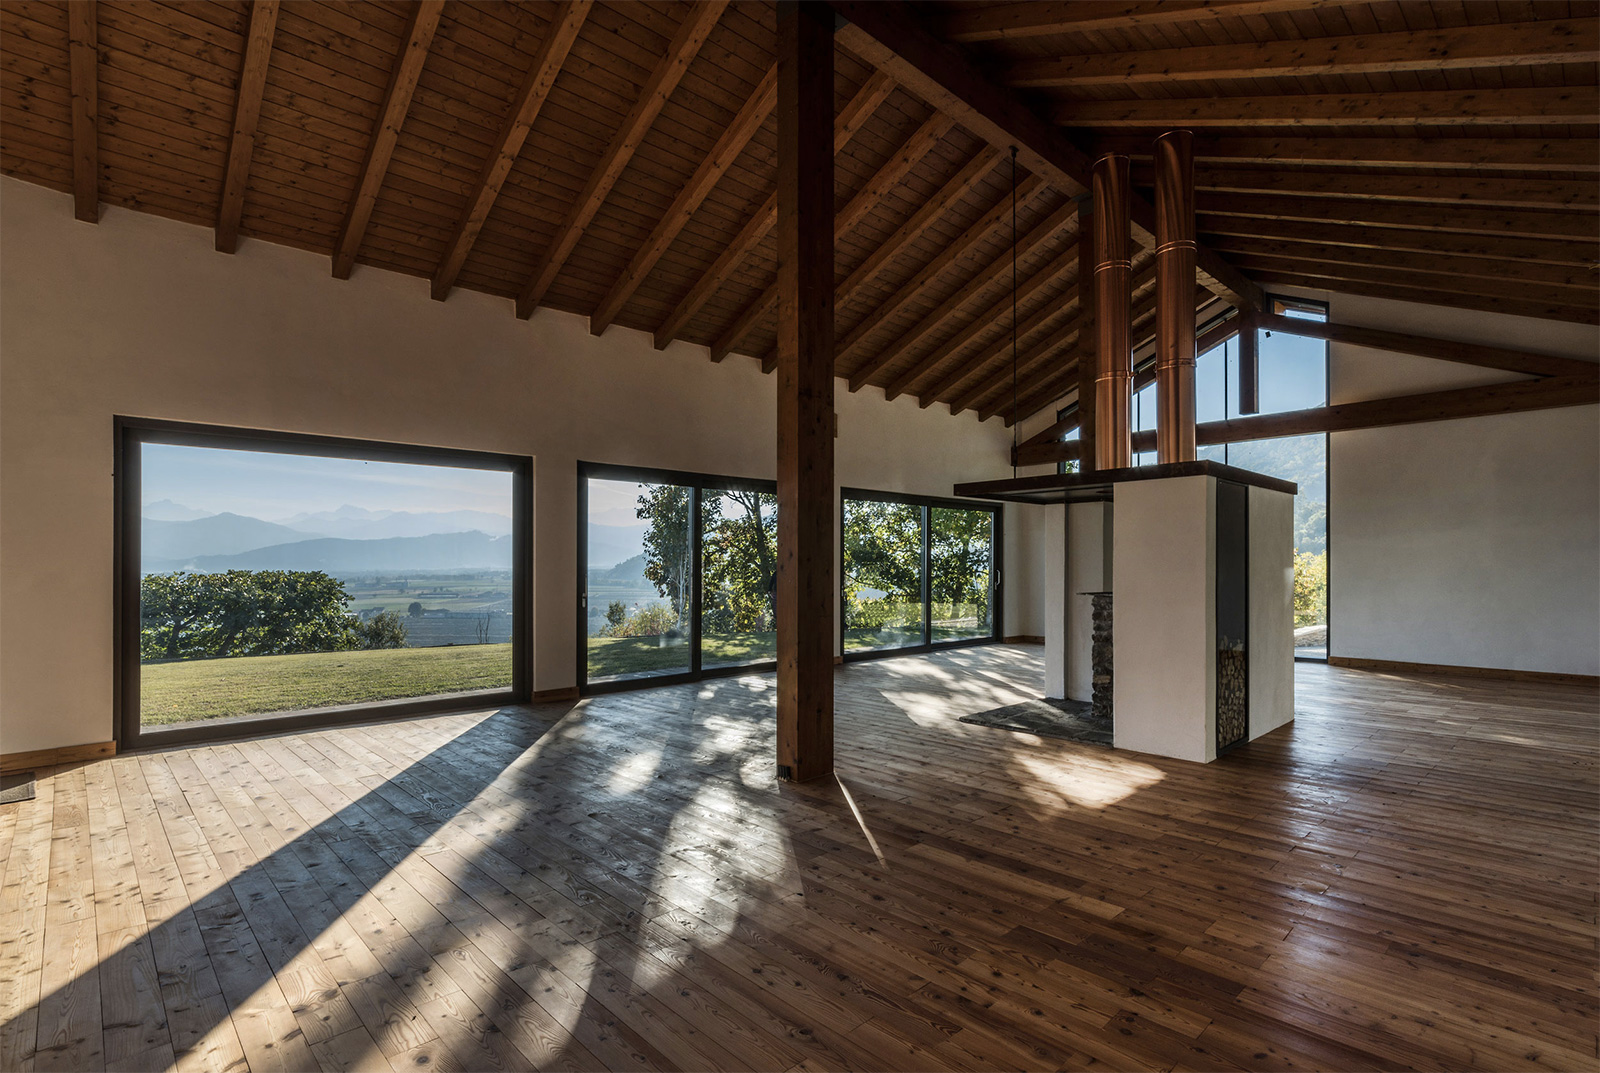 Villa con Vista: interiors feature timbed beamed ceilings, white walls and wooden floors